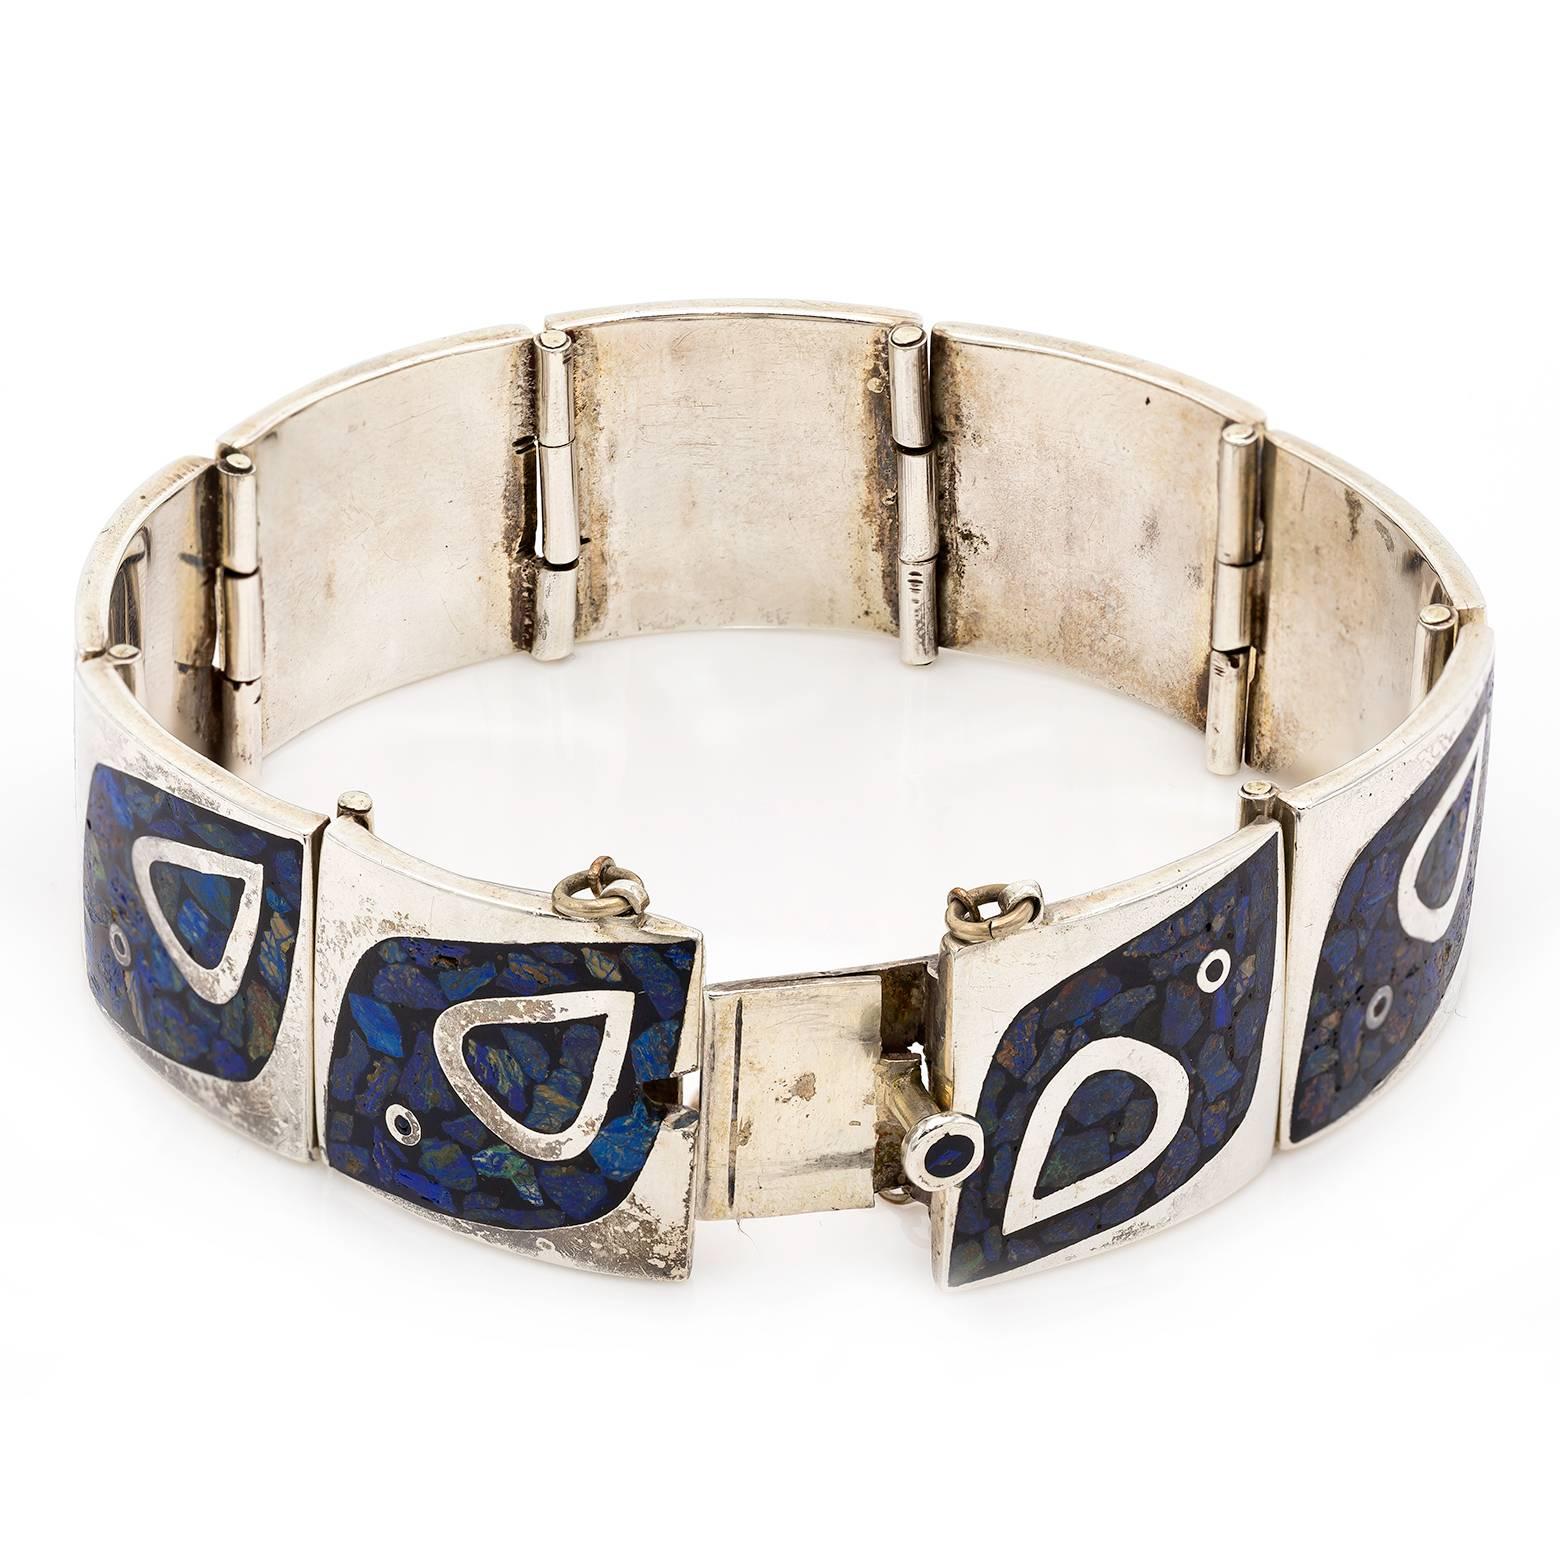 This handmade sterling silver bracelet is an antique from the 1970's with inlaid lapis stones, turquoise, and other complimenting blue stones. Stamped with the designers emblem this one of a kind bracelet also has a matching necklace, please inquire.